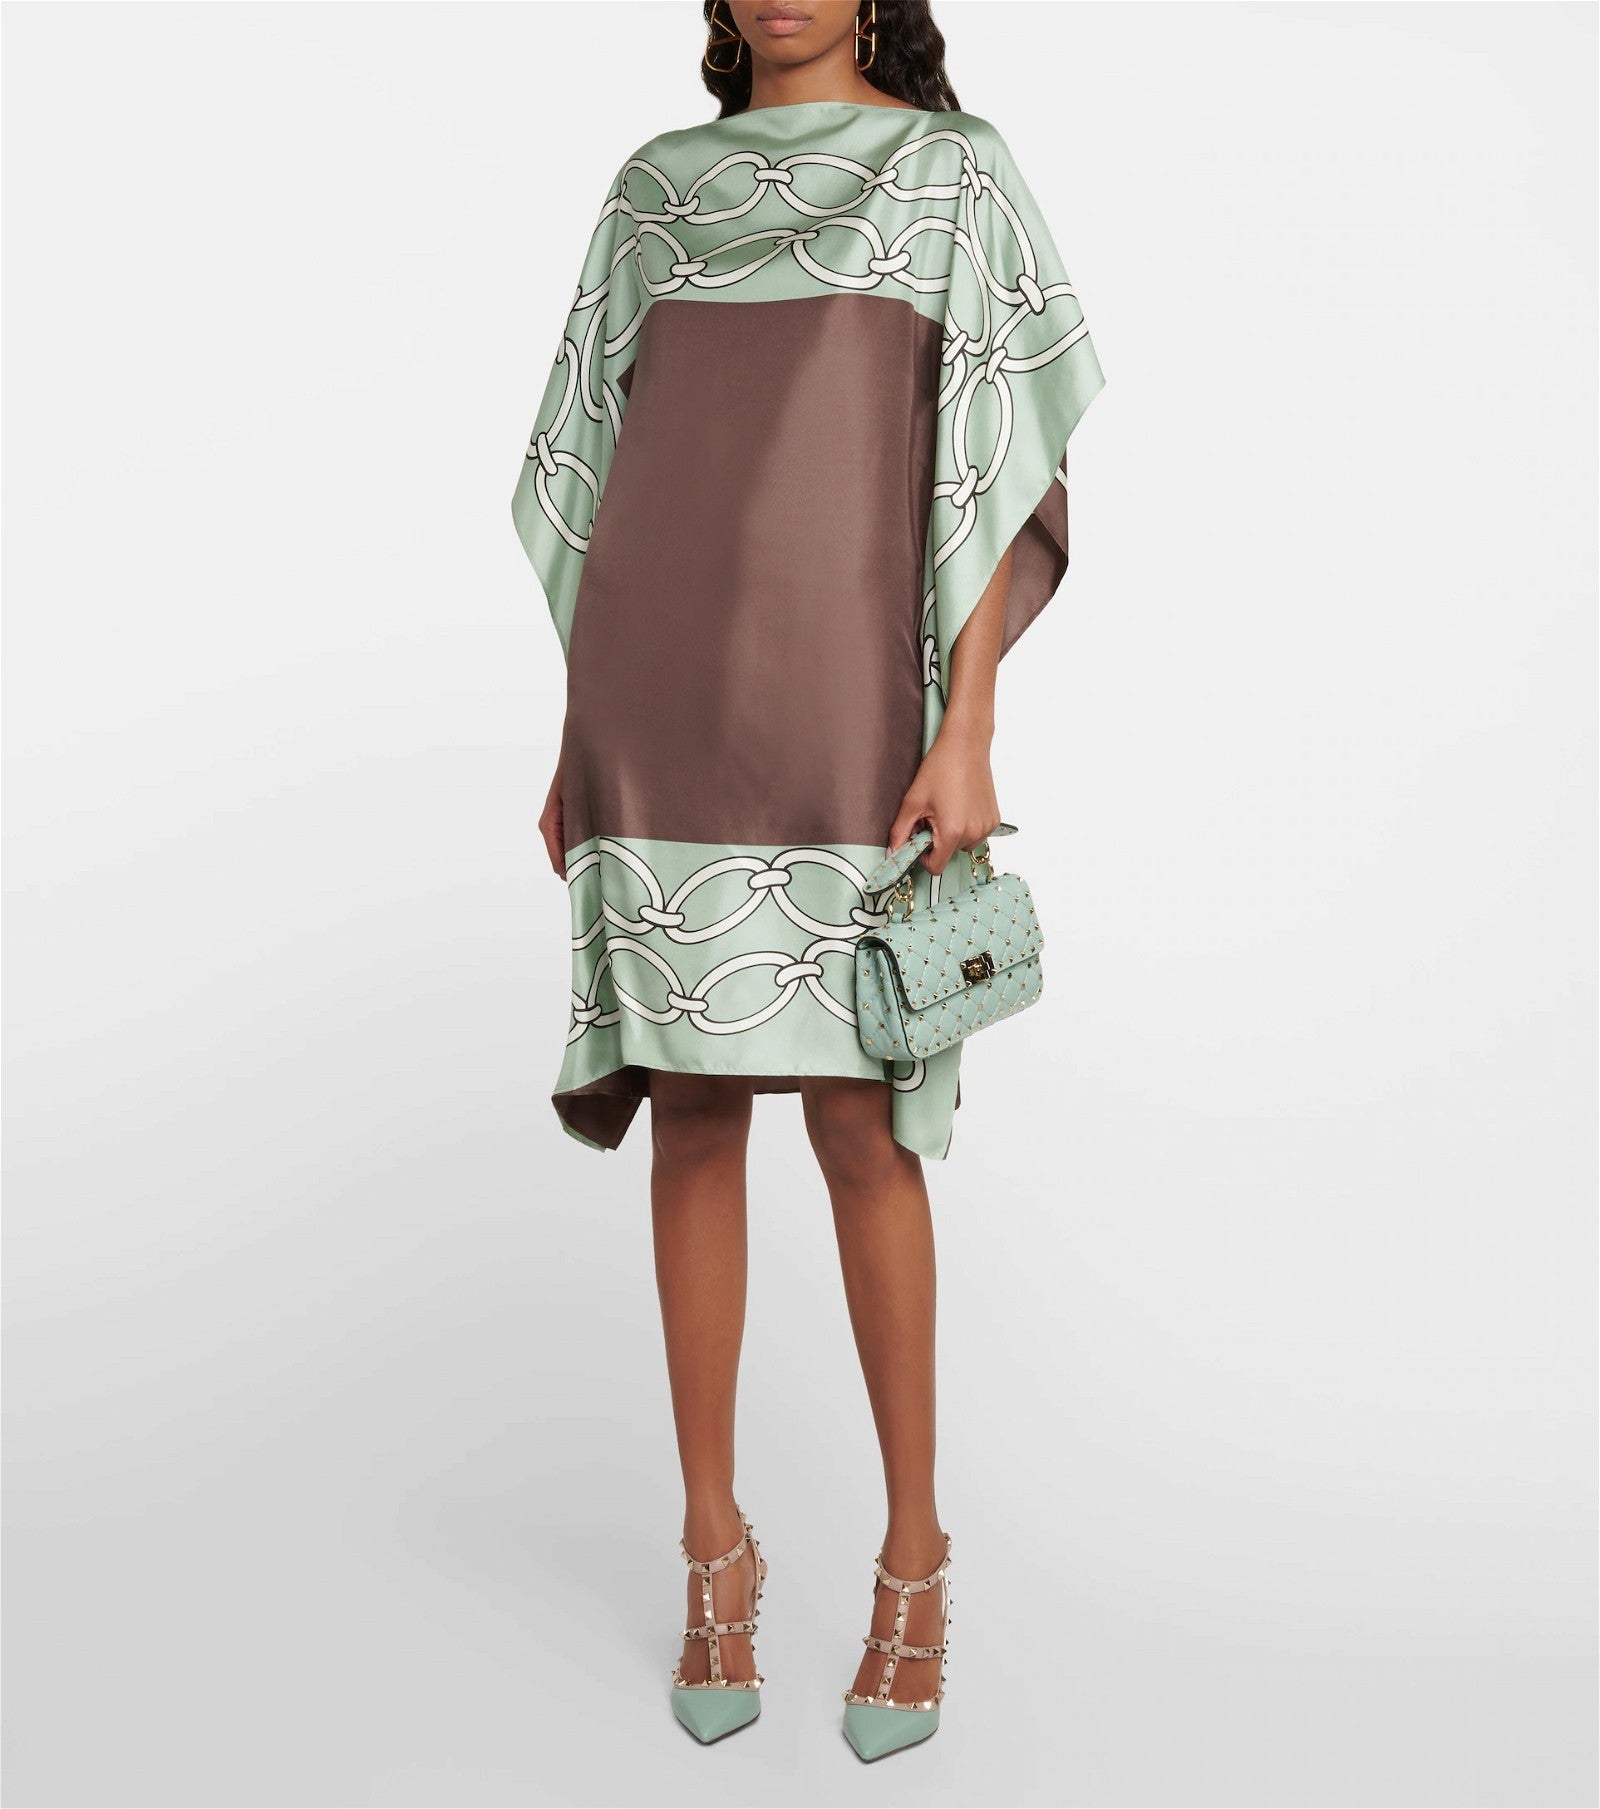 The model in the image is wearing Green Colour Printed Satin Silk Casual Wear Kaftan from Alice Milan. Crafted with the finest materials and impeccable attention to detail, the Kaftan / Dress looks premium, trendy, luxurious and offers unparalleled comfort. It’s a perfect clothing option for loungewear, resort wear, party wear or for an airport look. The woman in the image looks happy, and confident with her style statement putting a happy smile on her face.